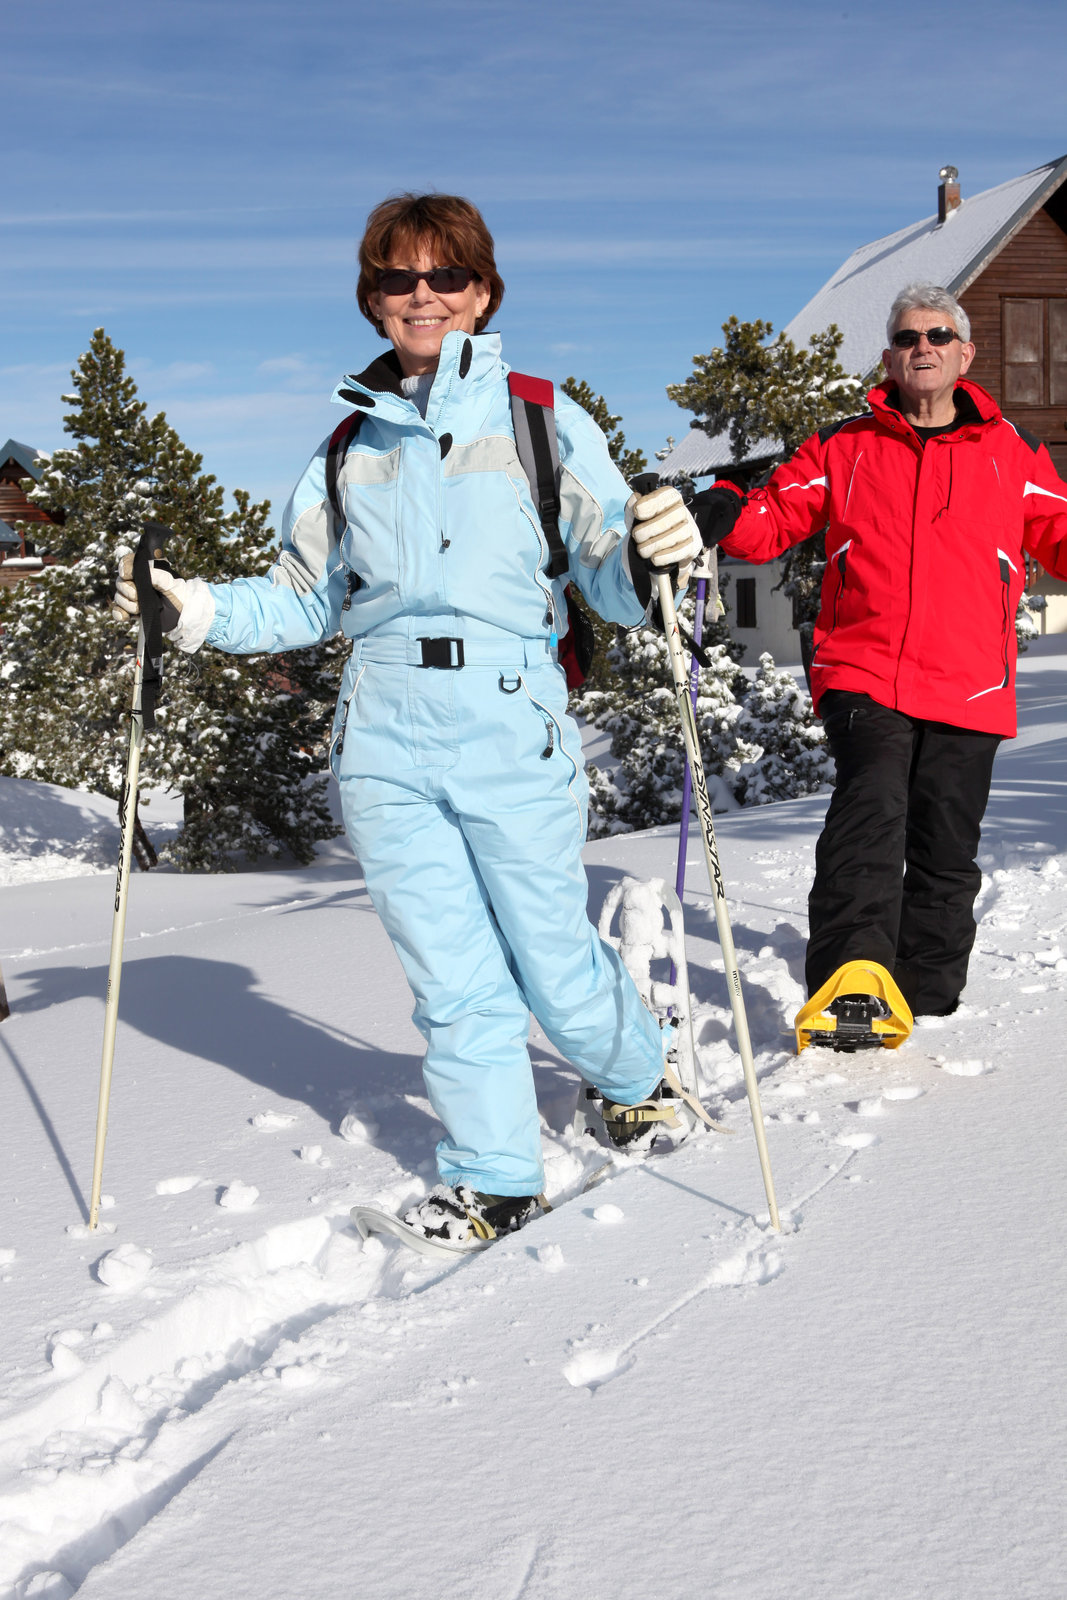 Chiropractor North York: Stay Safe and Have Fun with Snowshoeing